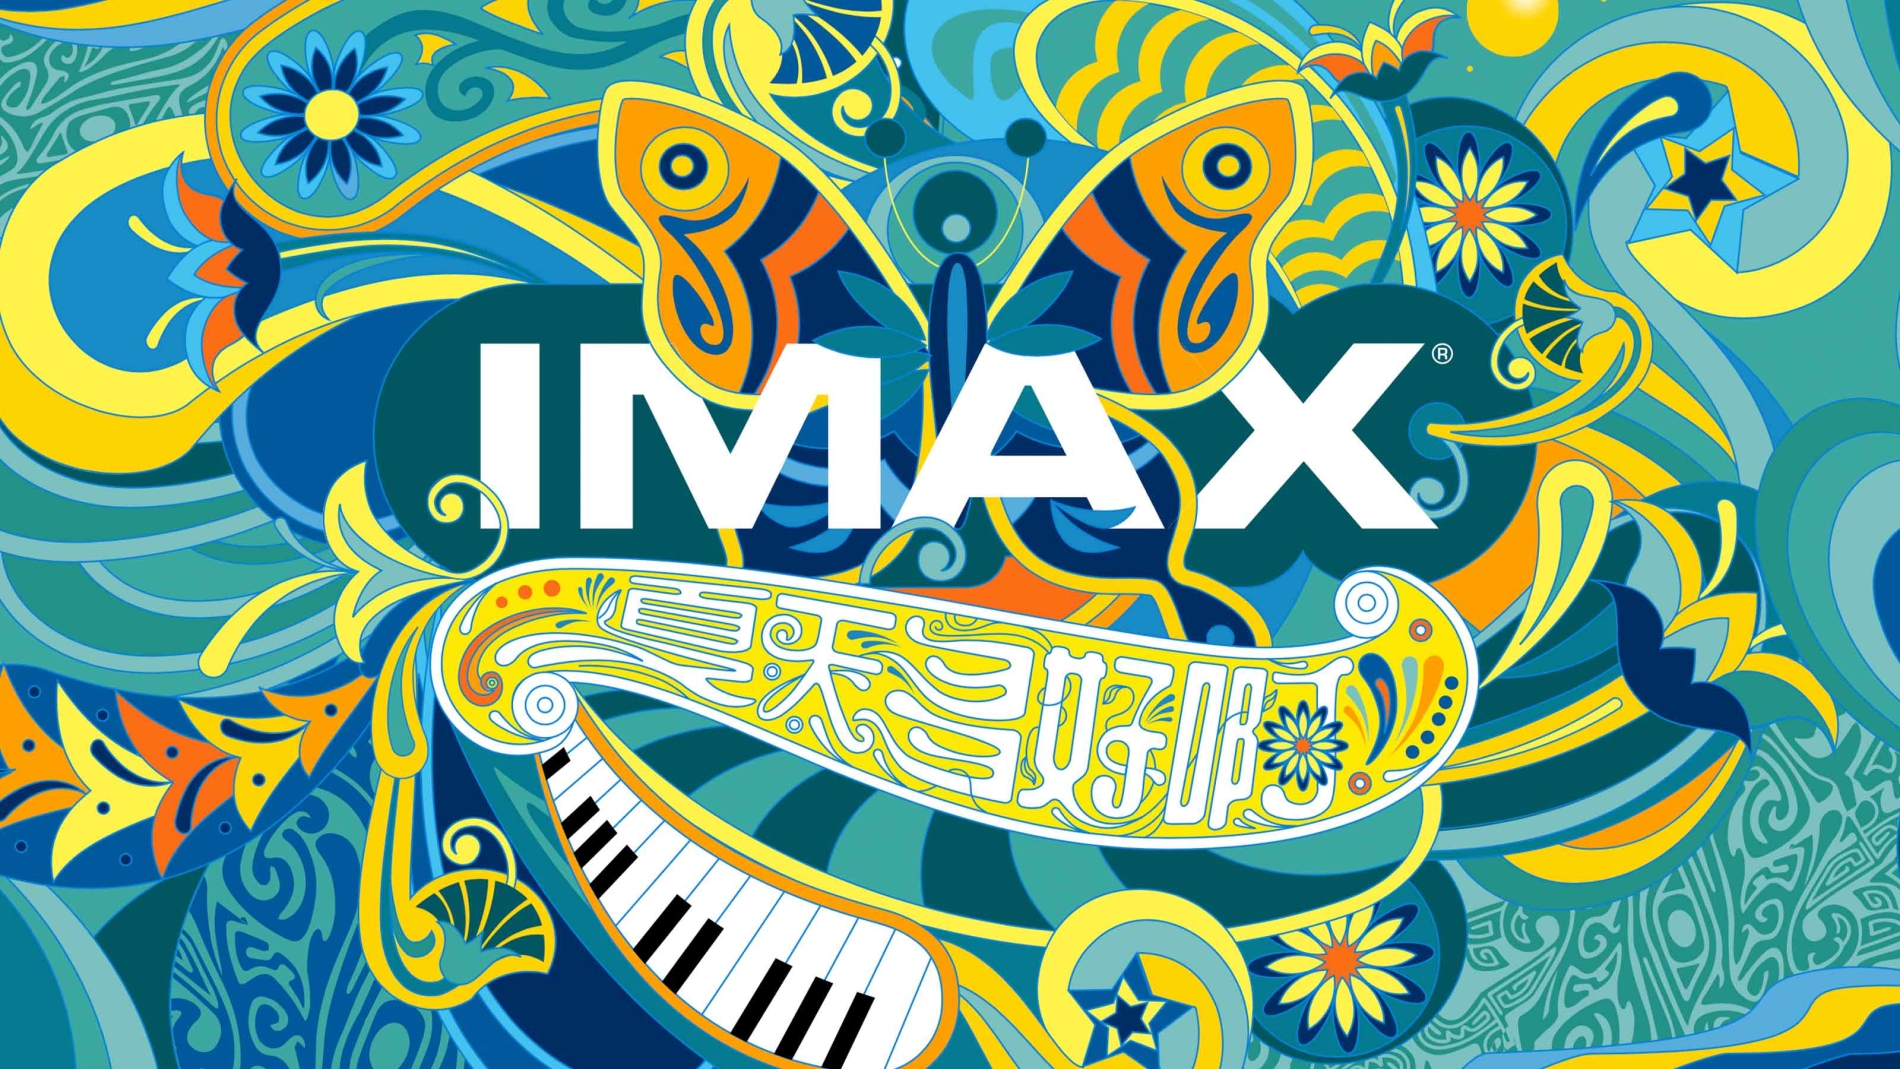 More Imax this summer